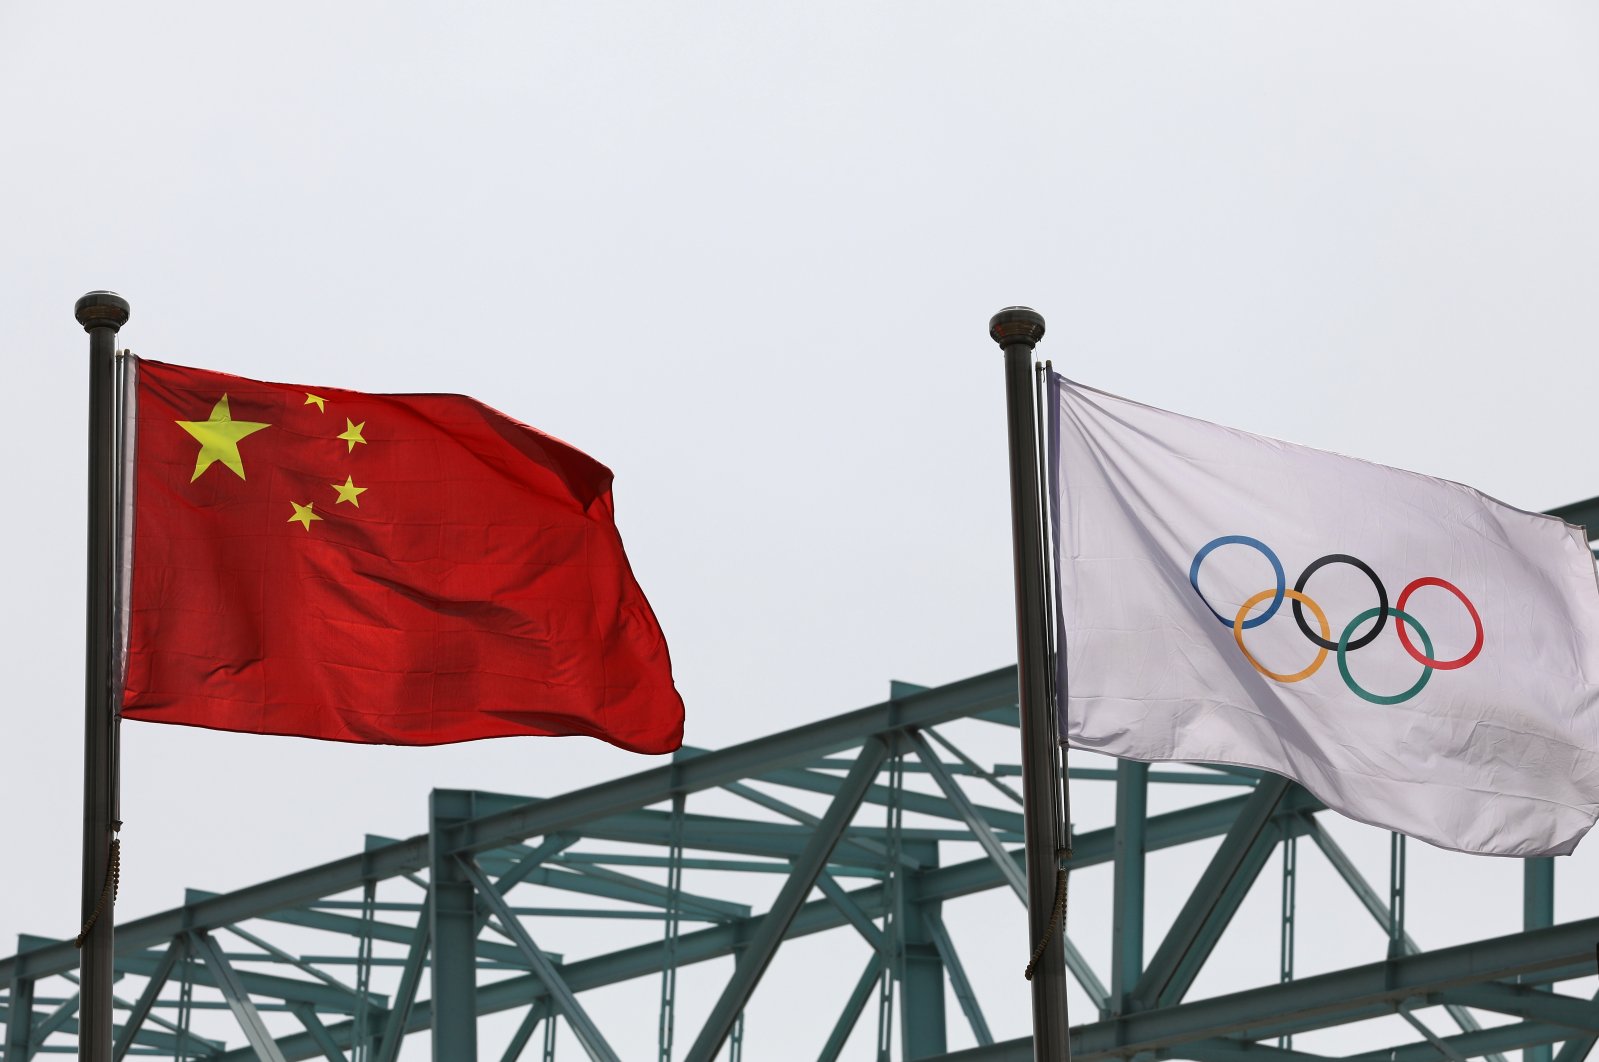 A Chinese national flag flutters next to an Olympic flag at the Beijing Organizing Committee for the 2022 Olympic and Paralympic Winter Games, in Beijing, China, March 30, 2021. (Reuters Photo)